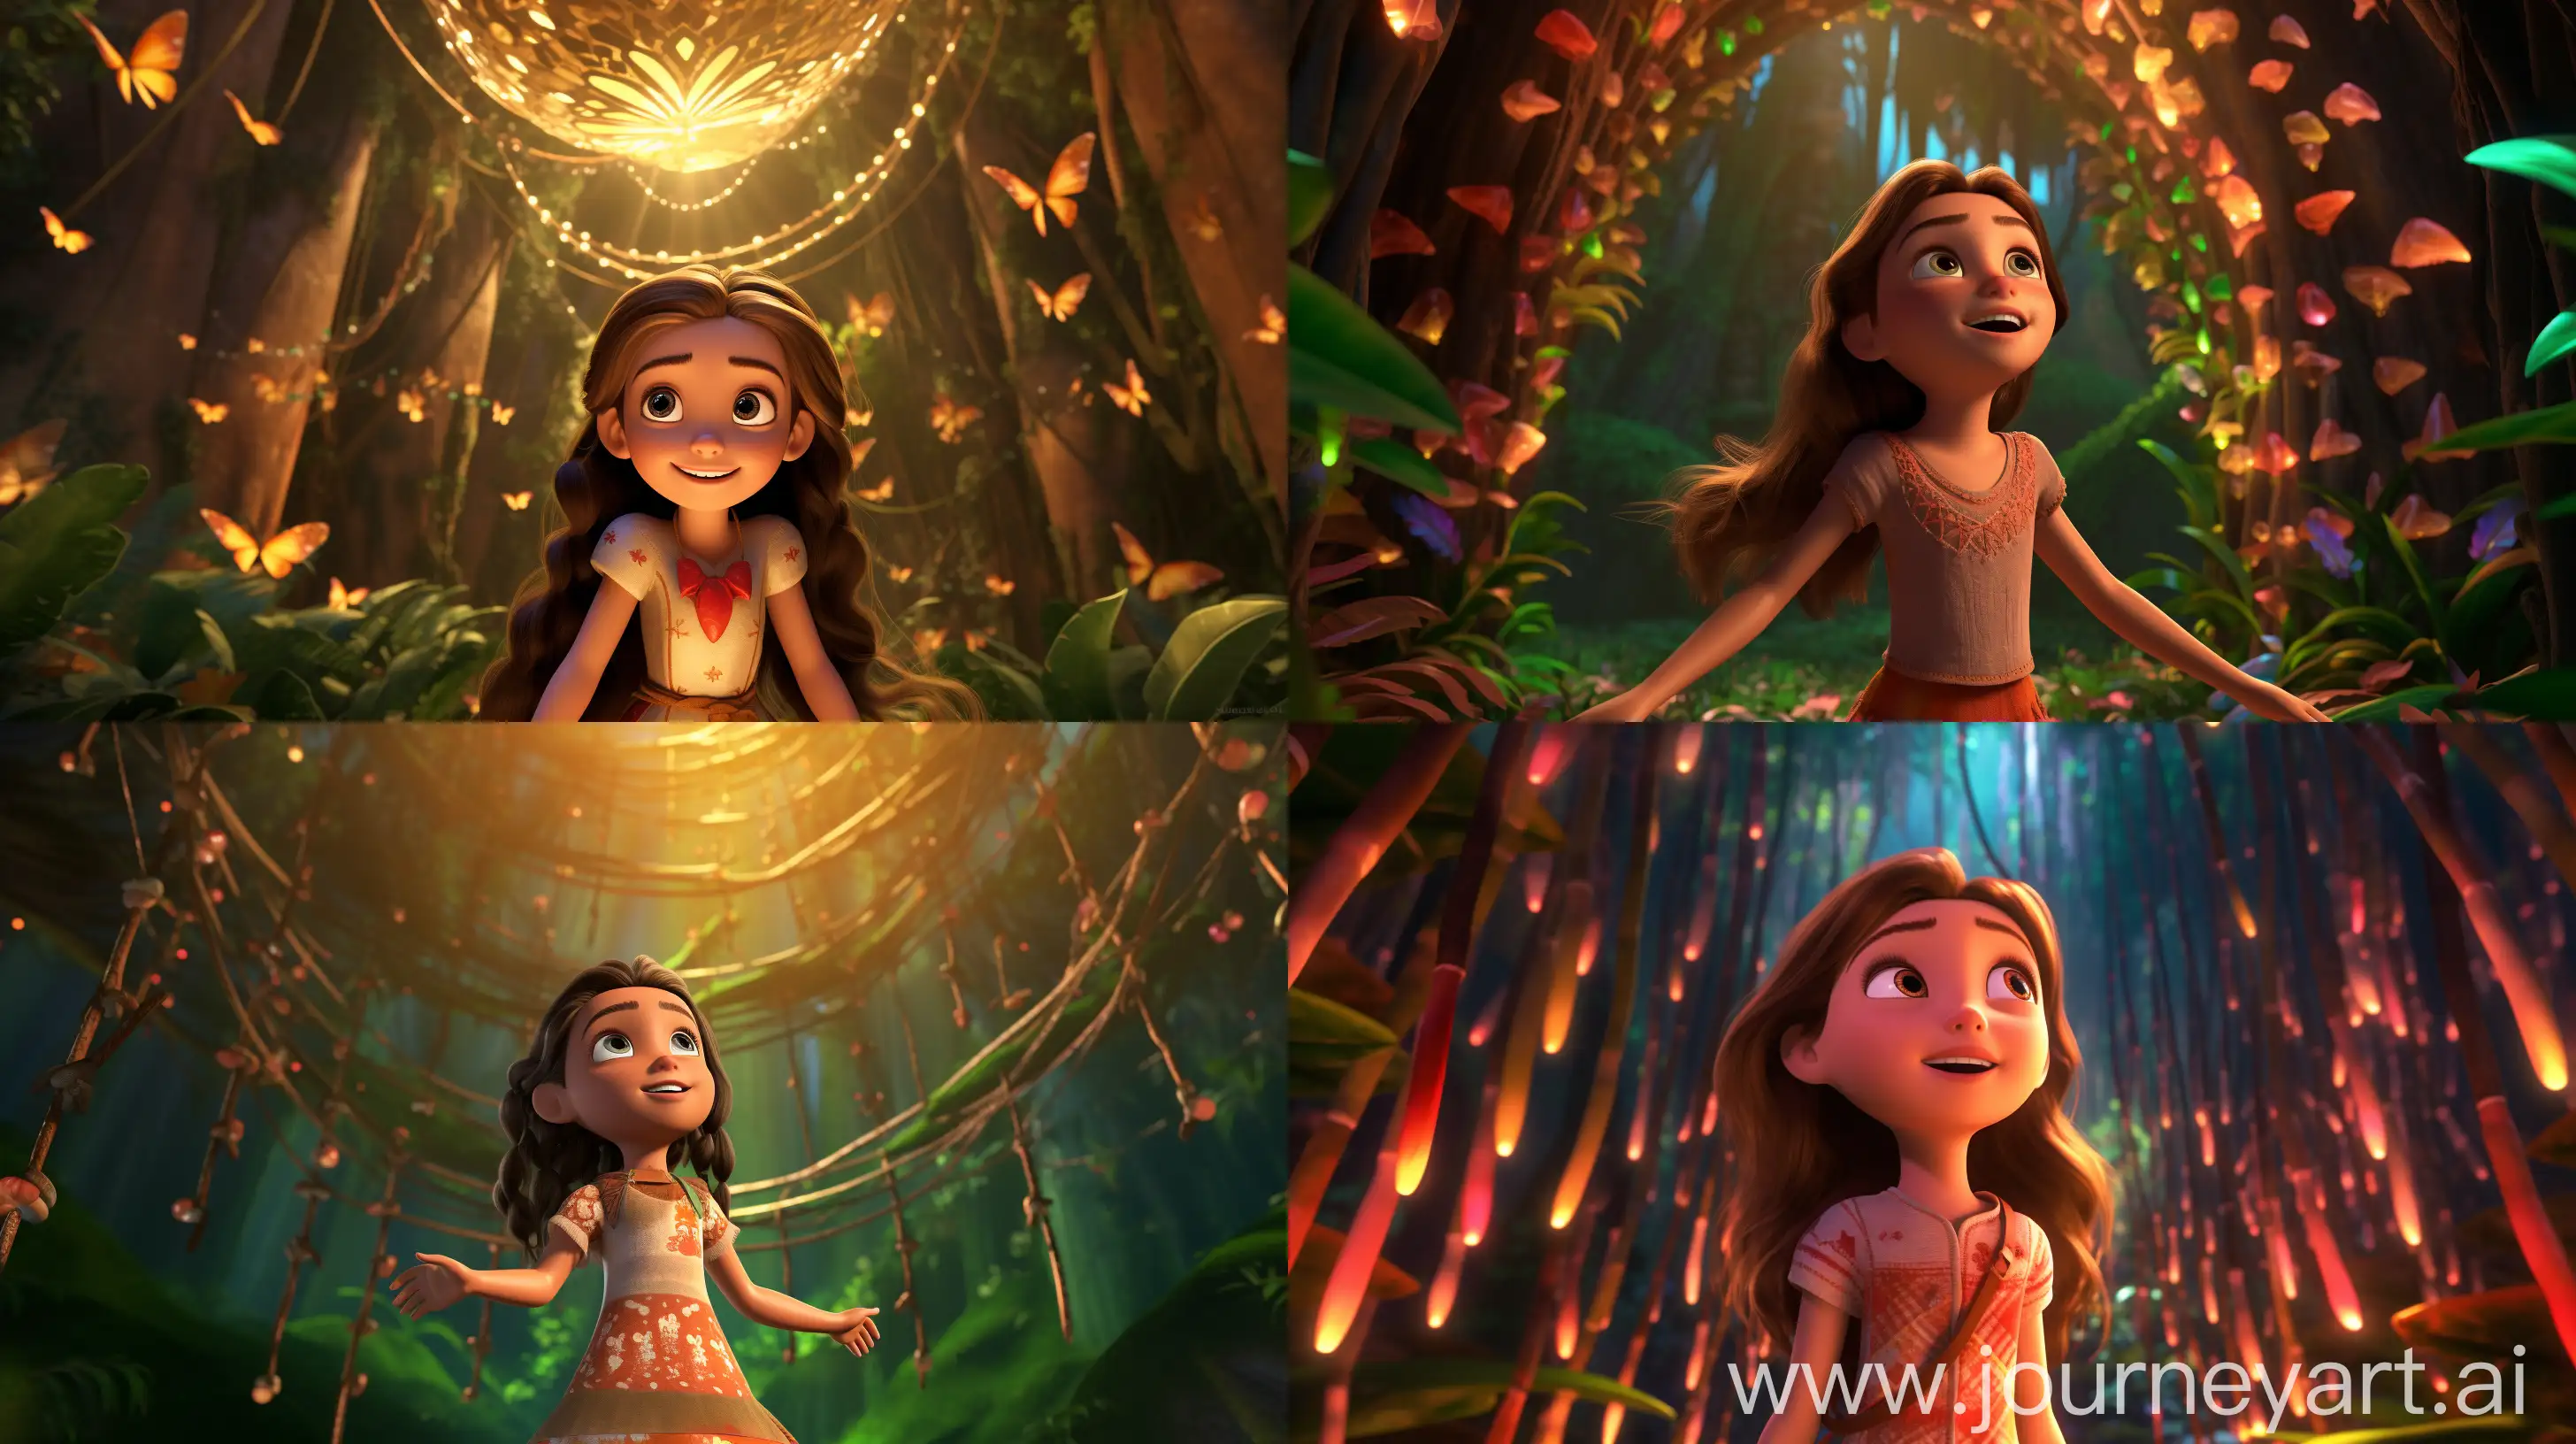 /imagine prompt: 3D Animation, personality: Lily, a young, curious girl with wide, gleaming eyes standing in the vibrant, enchanted forest surrounded by magical light. She wears a simple dress and her hair is tied in playful braids, reflecting the wonder and awe in her expression. The sun rays pierce through the canopy above, creating a kaleidoscope of light around her, adding to the enchanting atmosphere. unreal engine, hyper real --q 2 --v 5.2 --ar 16:9